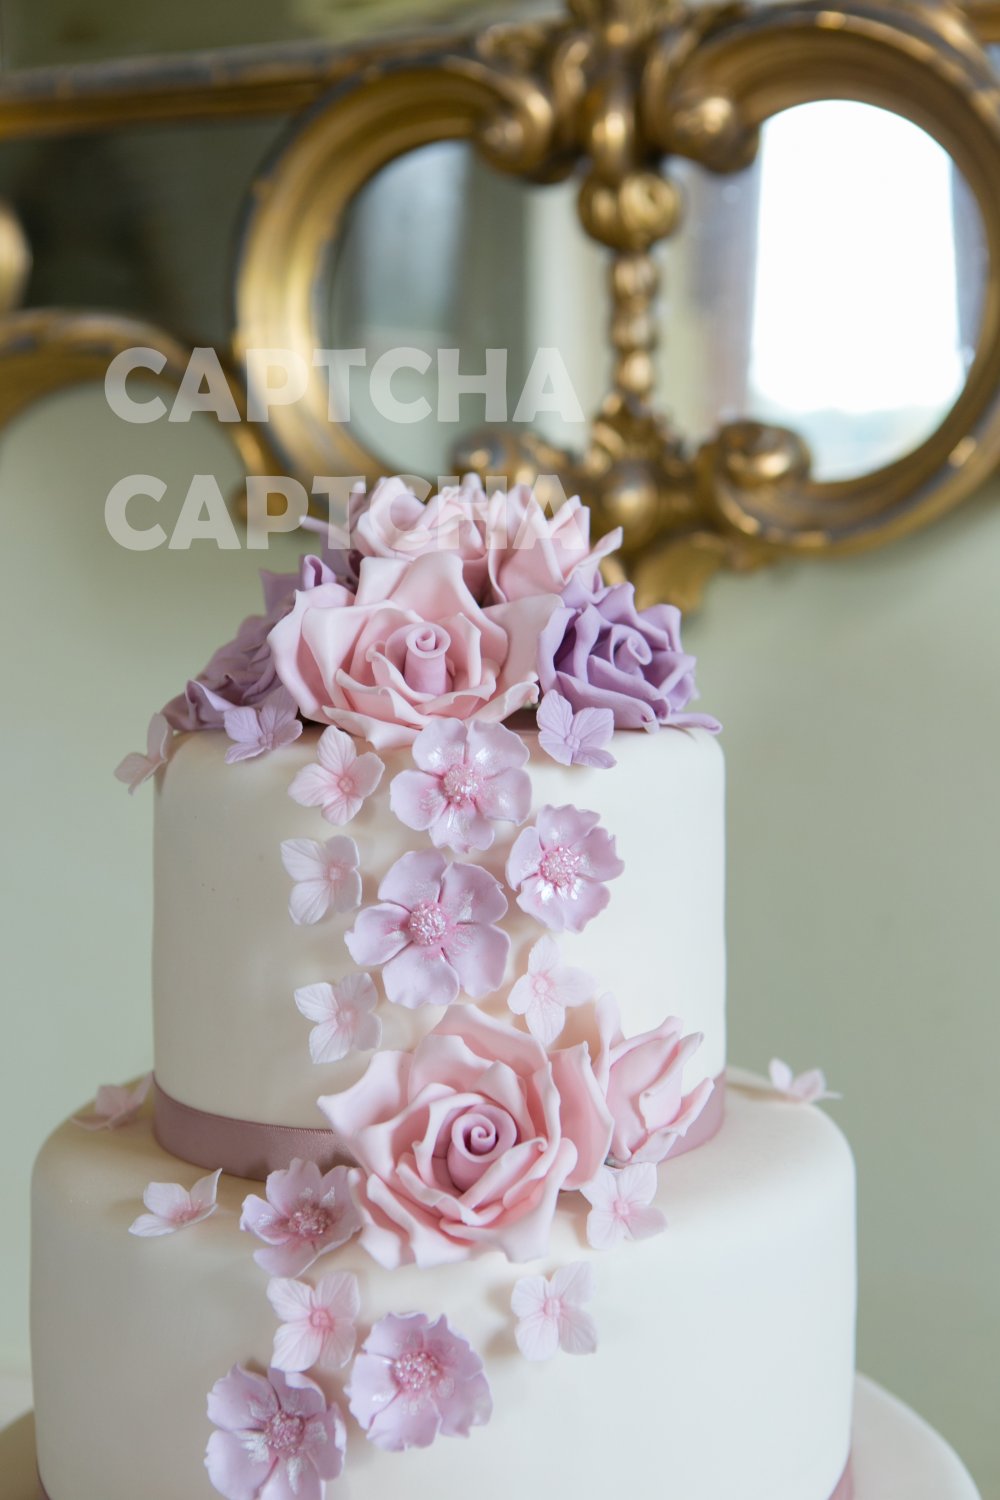 Wedding Cakes - making it personal to you! 